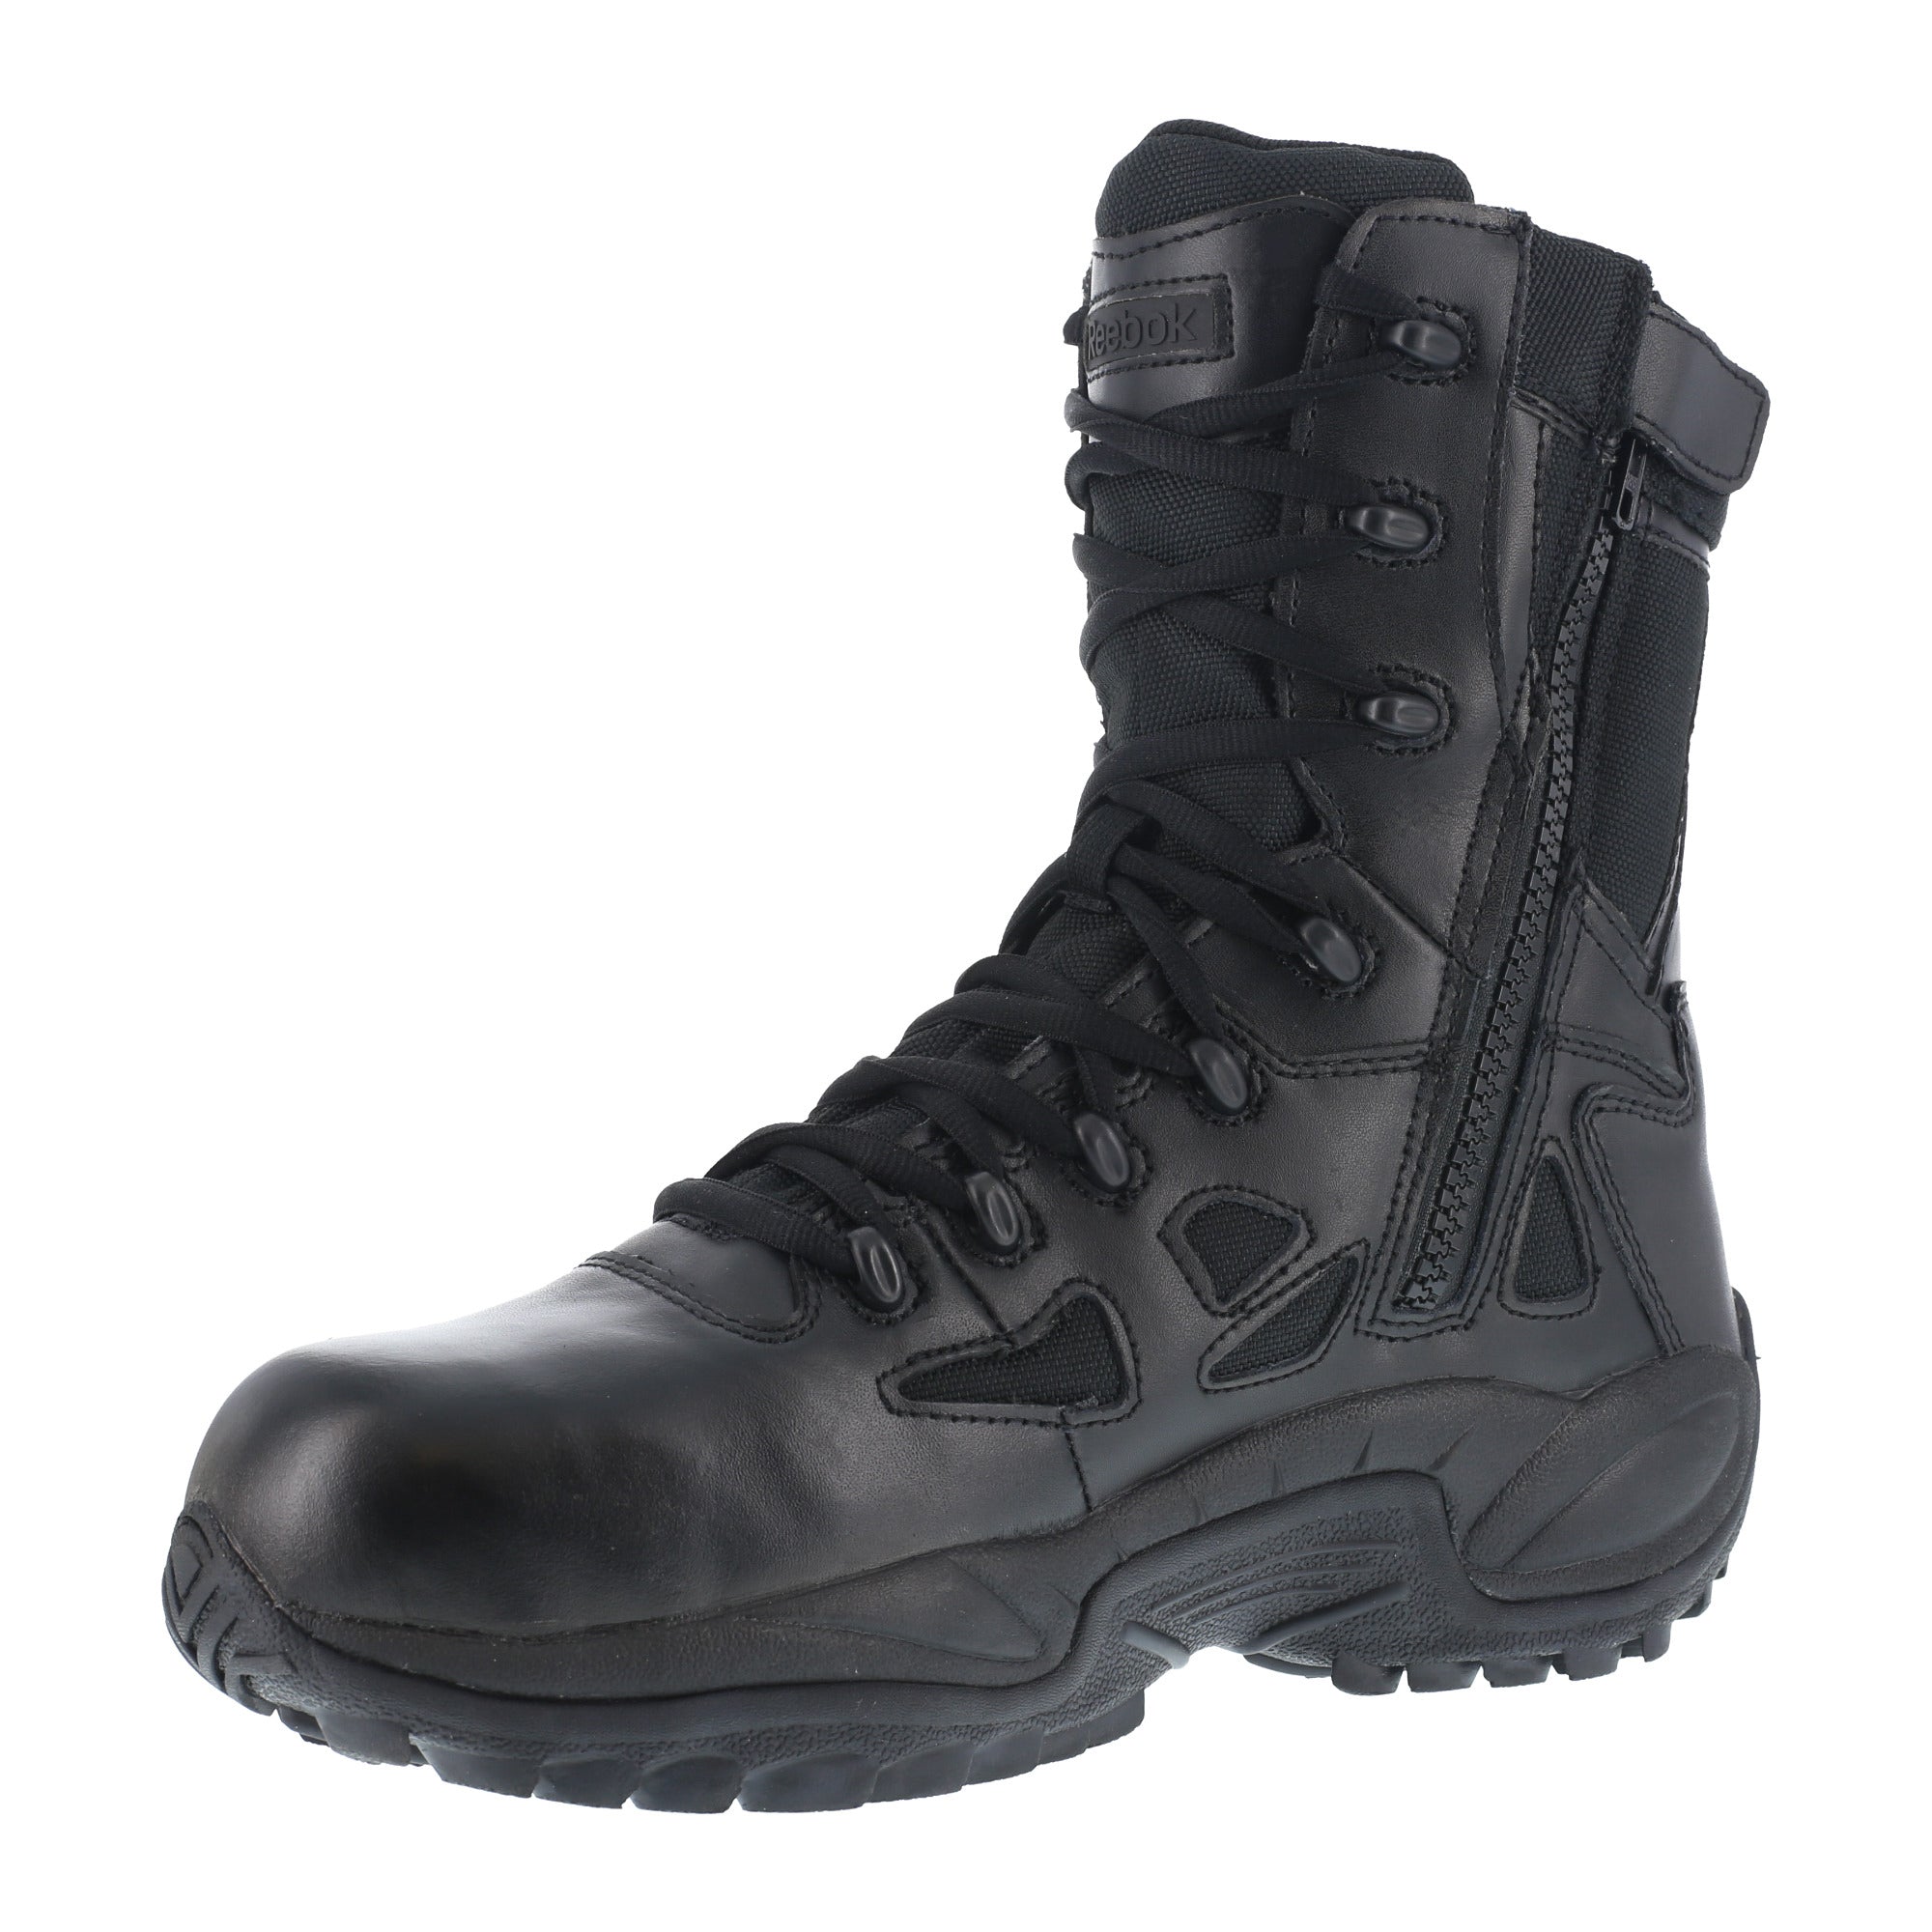 Reebok Mens Black Leather Tactical Boots Rapid Response RB Comp Toe ...